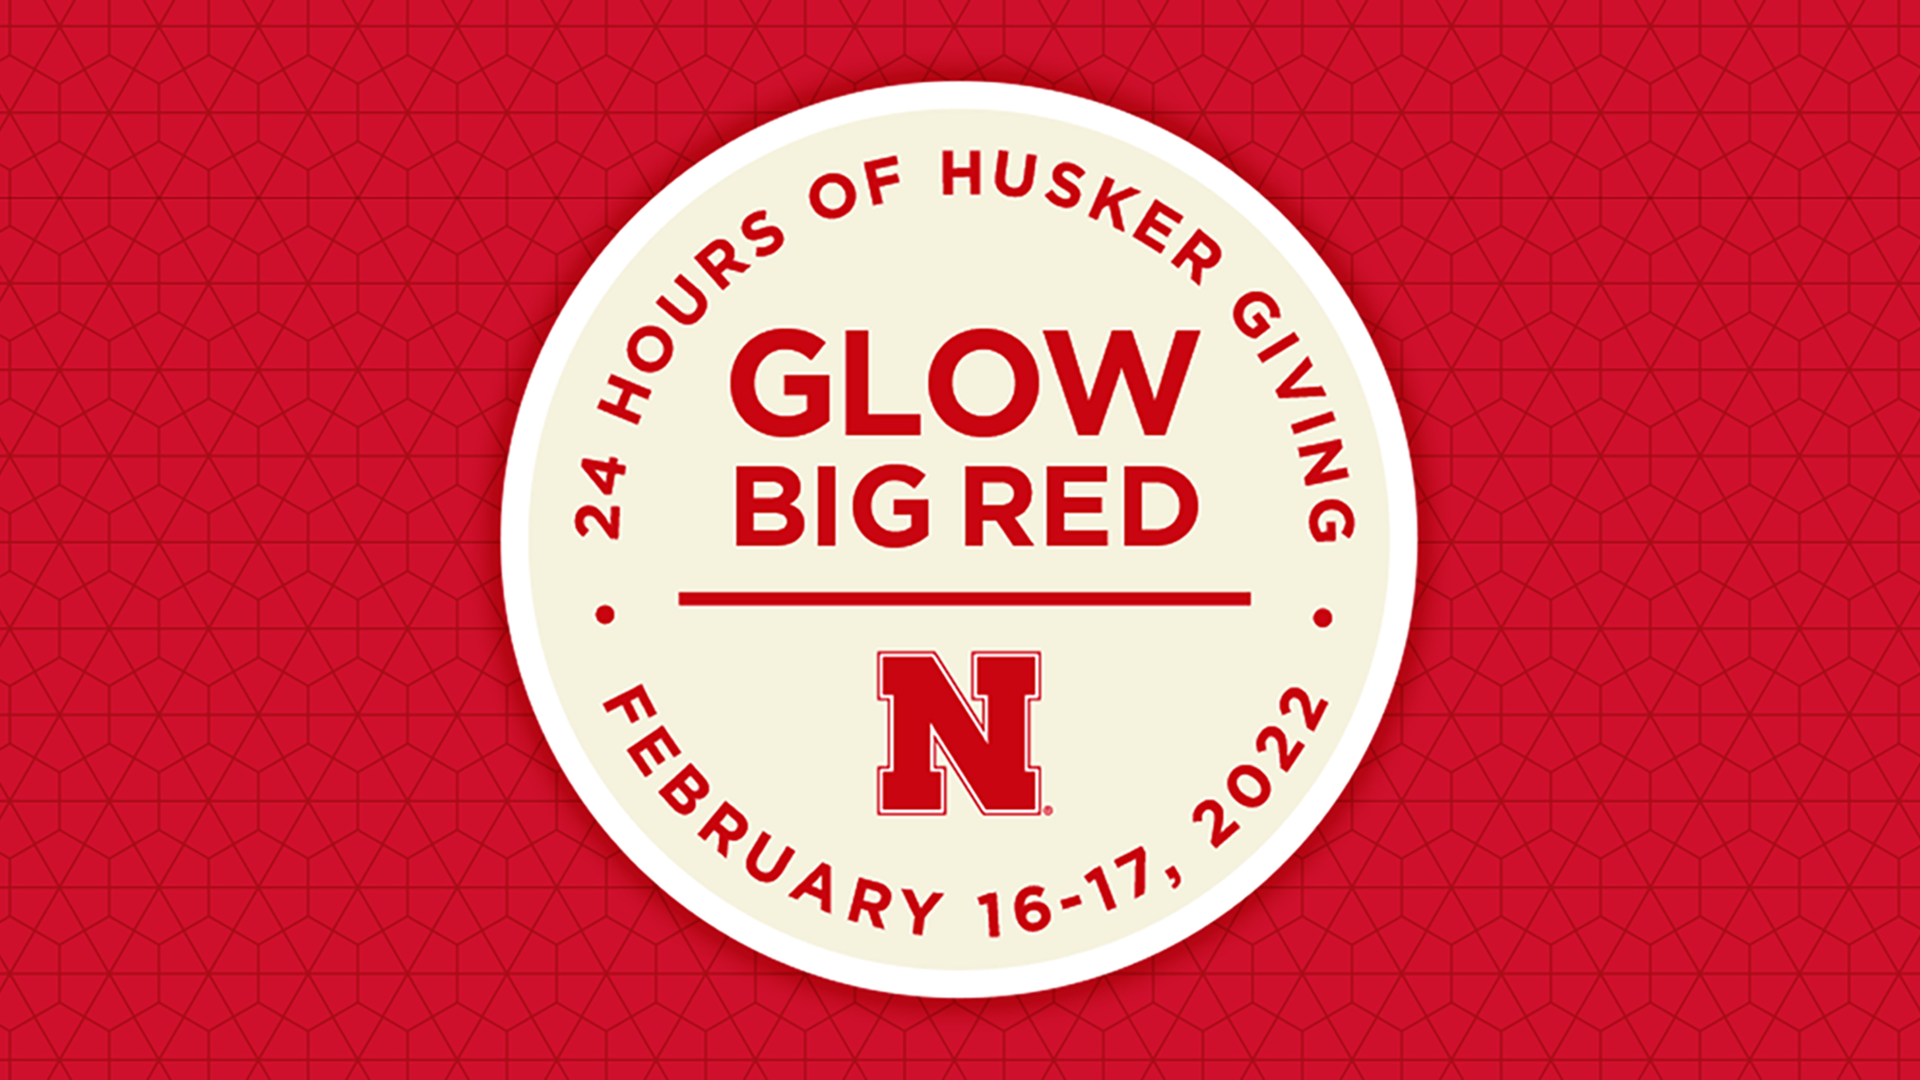 Glow Big Red now!